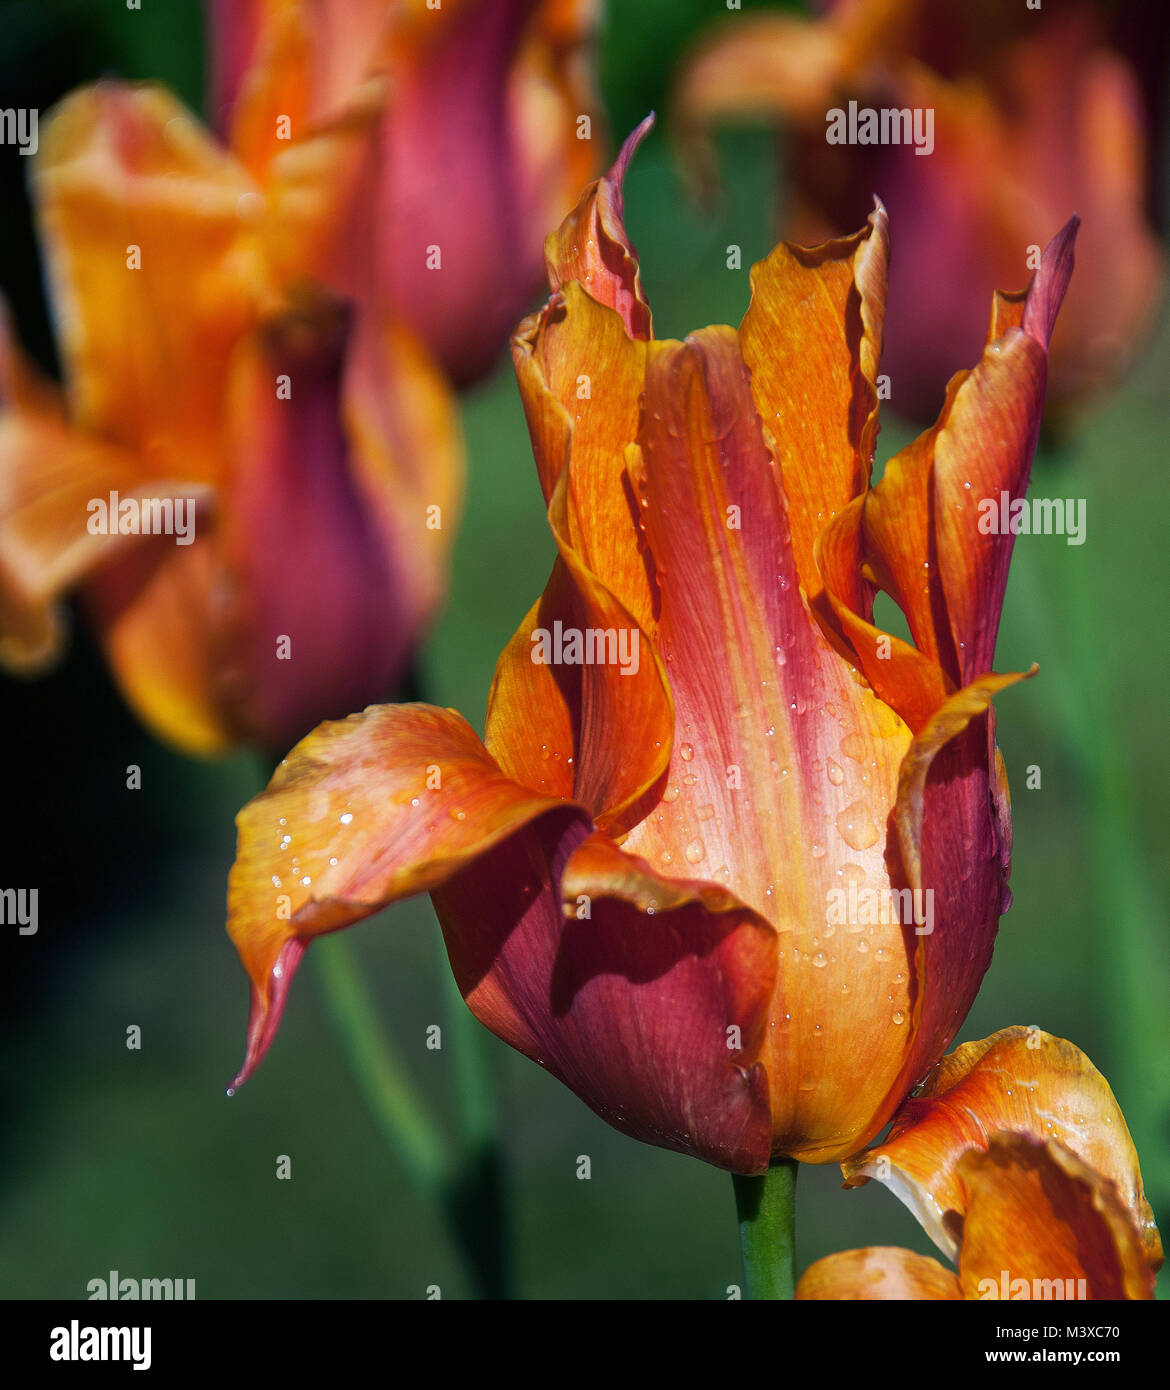 Tulipa Ballerina  An elegant orange and scarlet lily-flowered tulip after a rain shower; Stock Photo